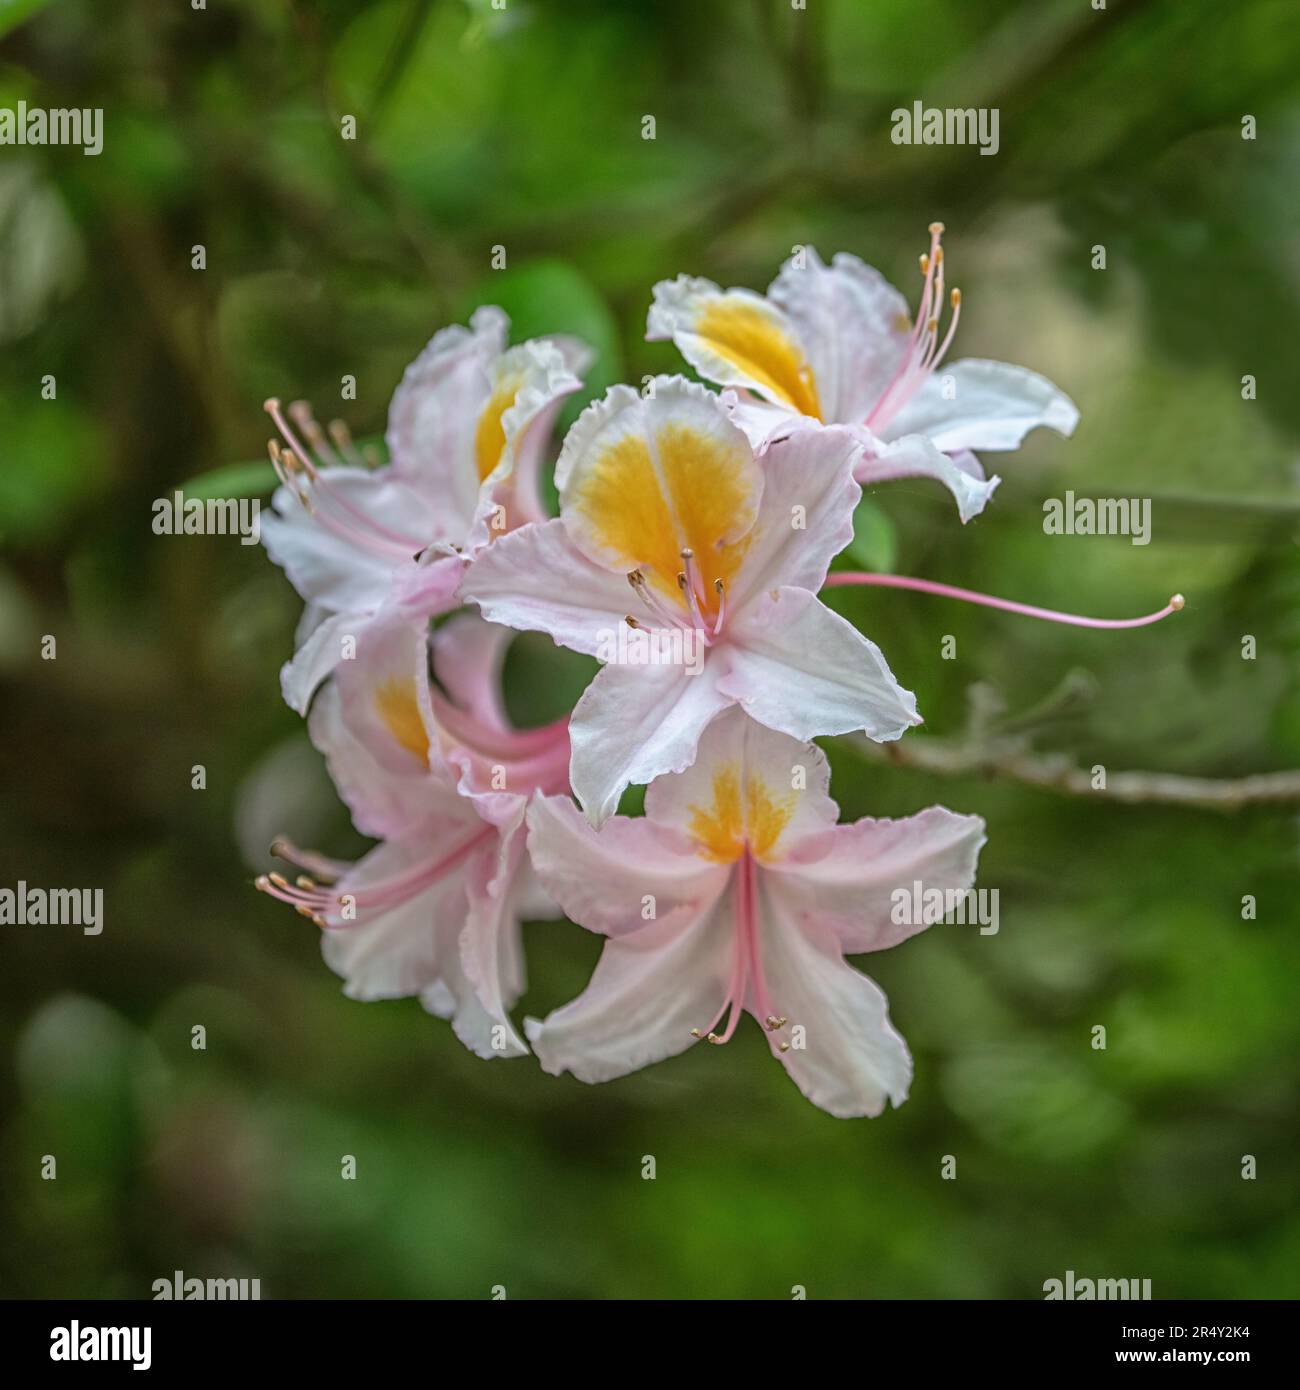 Rhododendron in flower Stock Photo